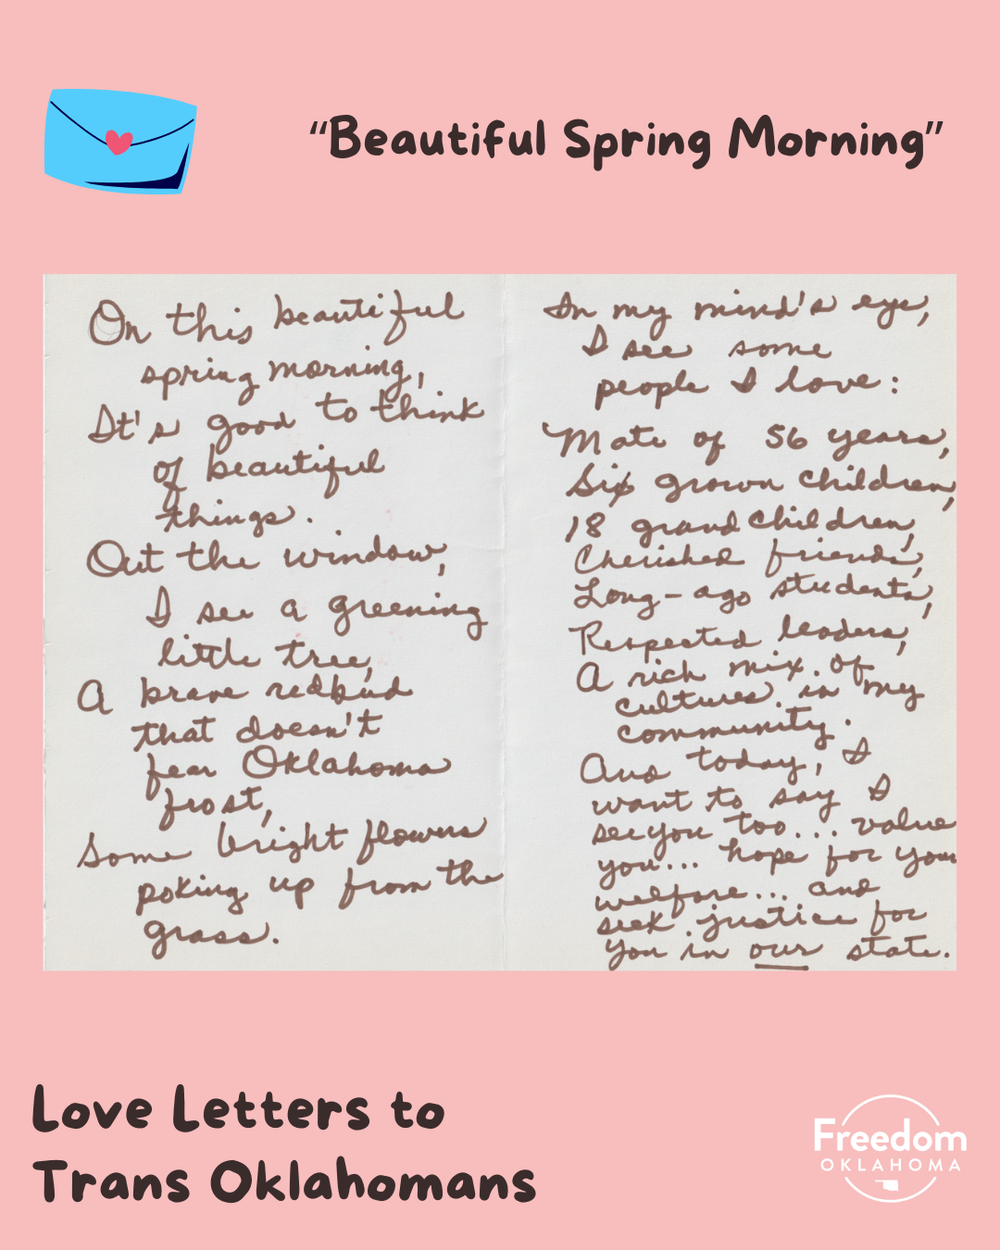  Similar pink graphic with artwork in the center: Piece titled "Beautiful Spring Morning." A hand-written cursive letter on a piece of white paper. "On this beautiful spring morning, it's good to think of beautiful things. Out the window, I see a gre